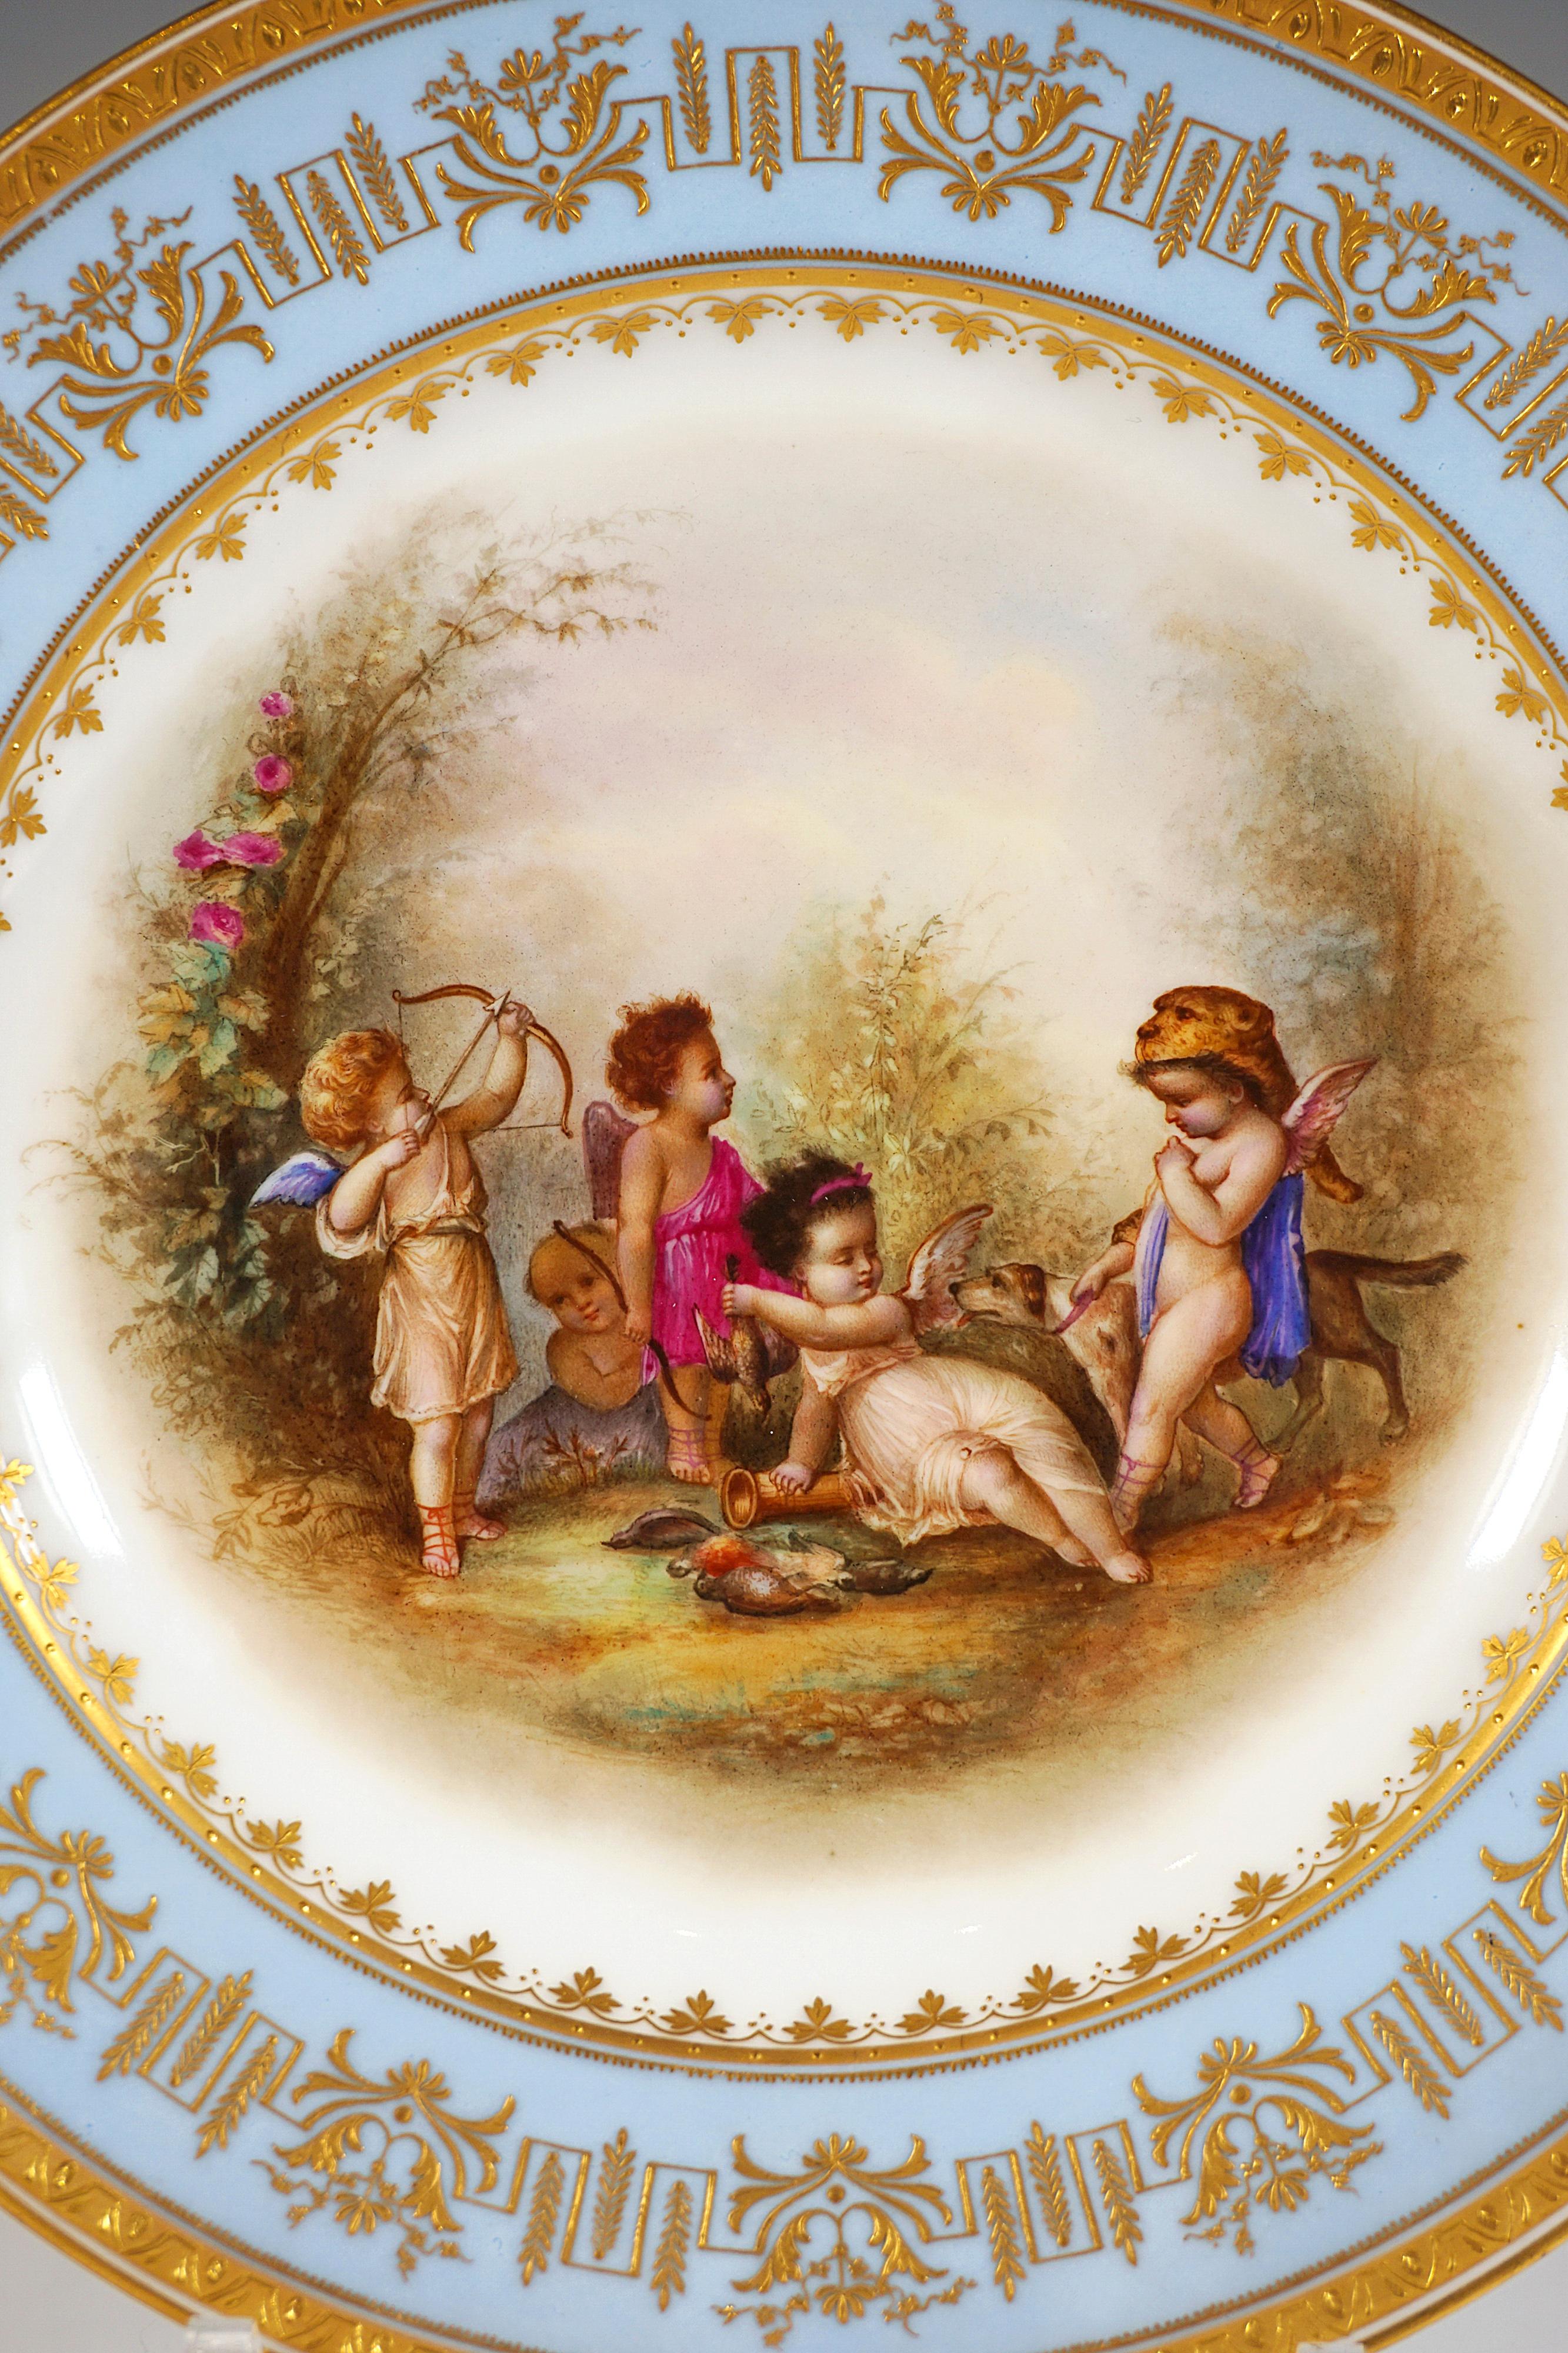 Porcelain picture plate with fine polychrome painted scenery:
In the mirror five winged cupids dressed as hunters with dog in a summer landscape against a white background, framed by golden leaf garland, plate flag in light blue with delicate